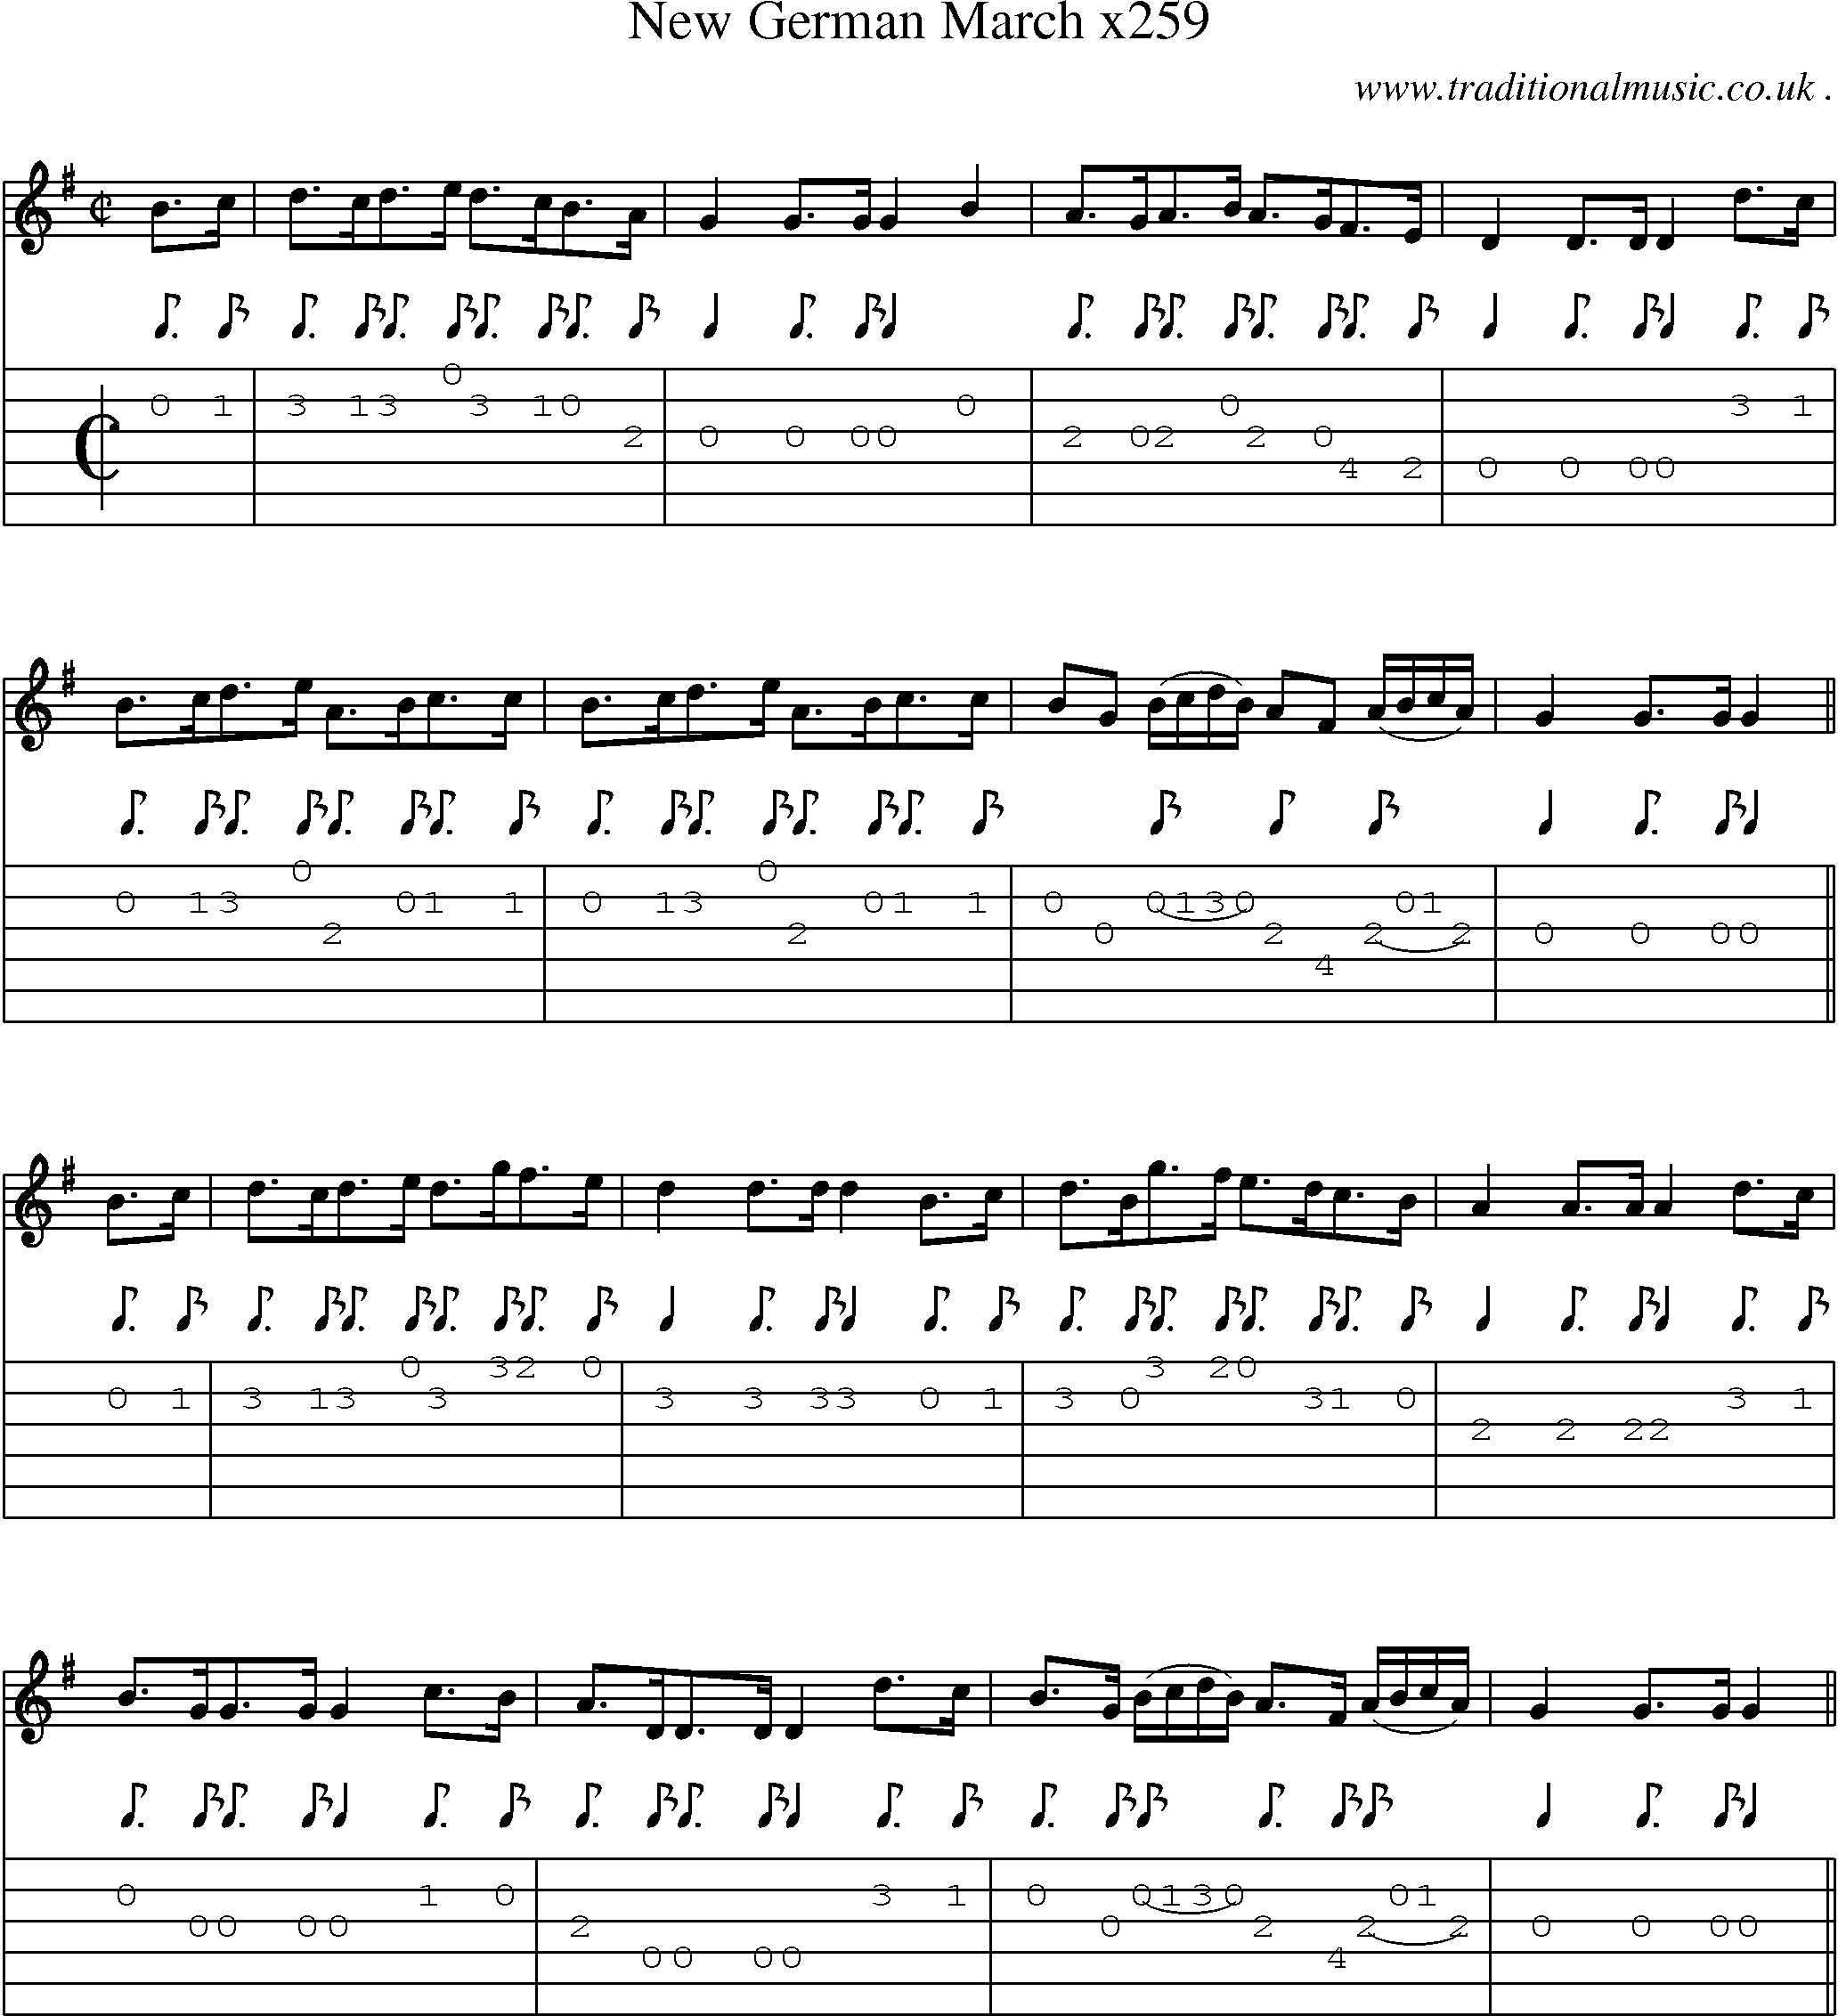 Sheet-Music and Guitar Tabs for New German March X259